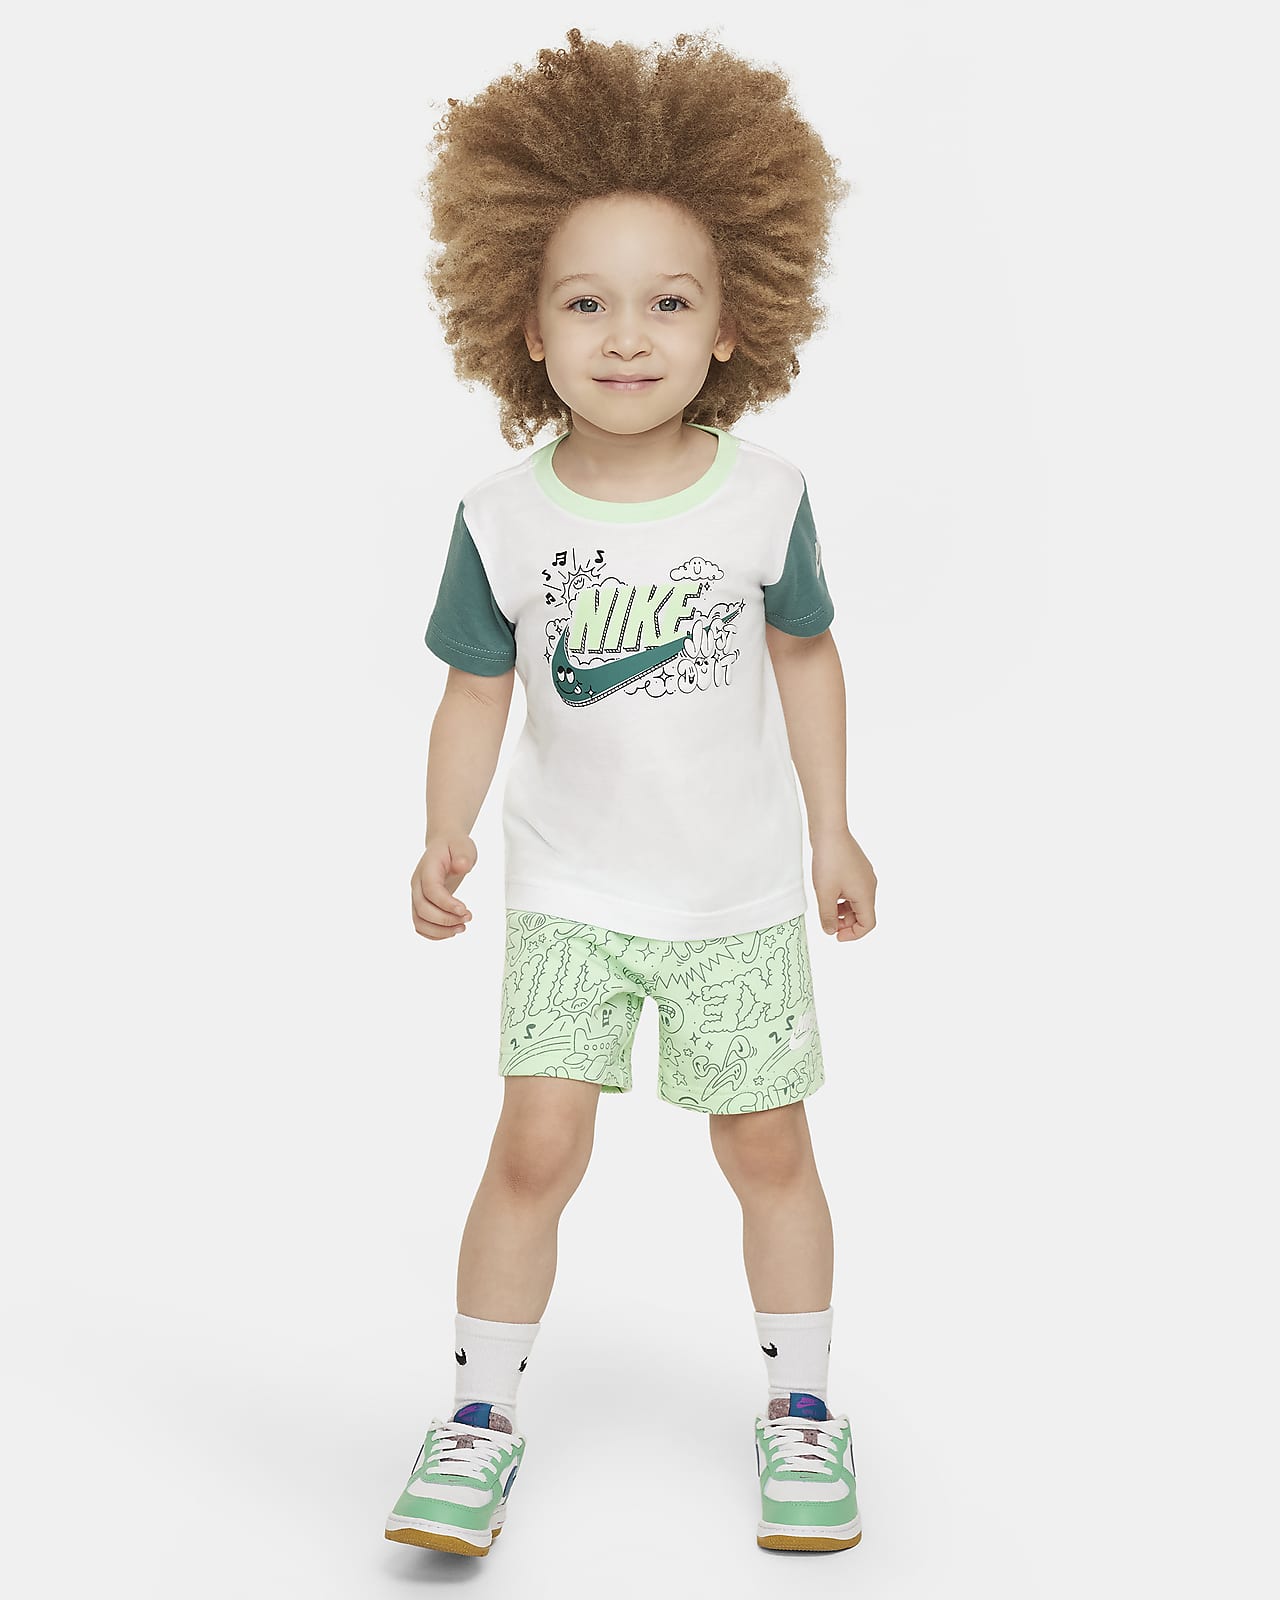 Nike Sportswear Create Your Own Adventure Toddler T-Shirt and Shorts Set